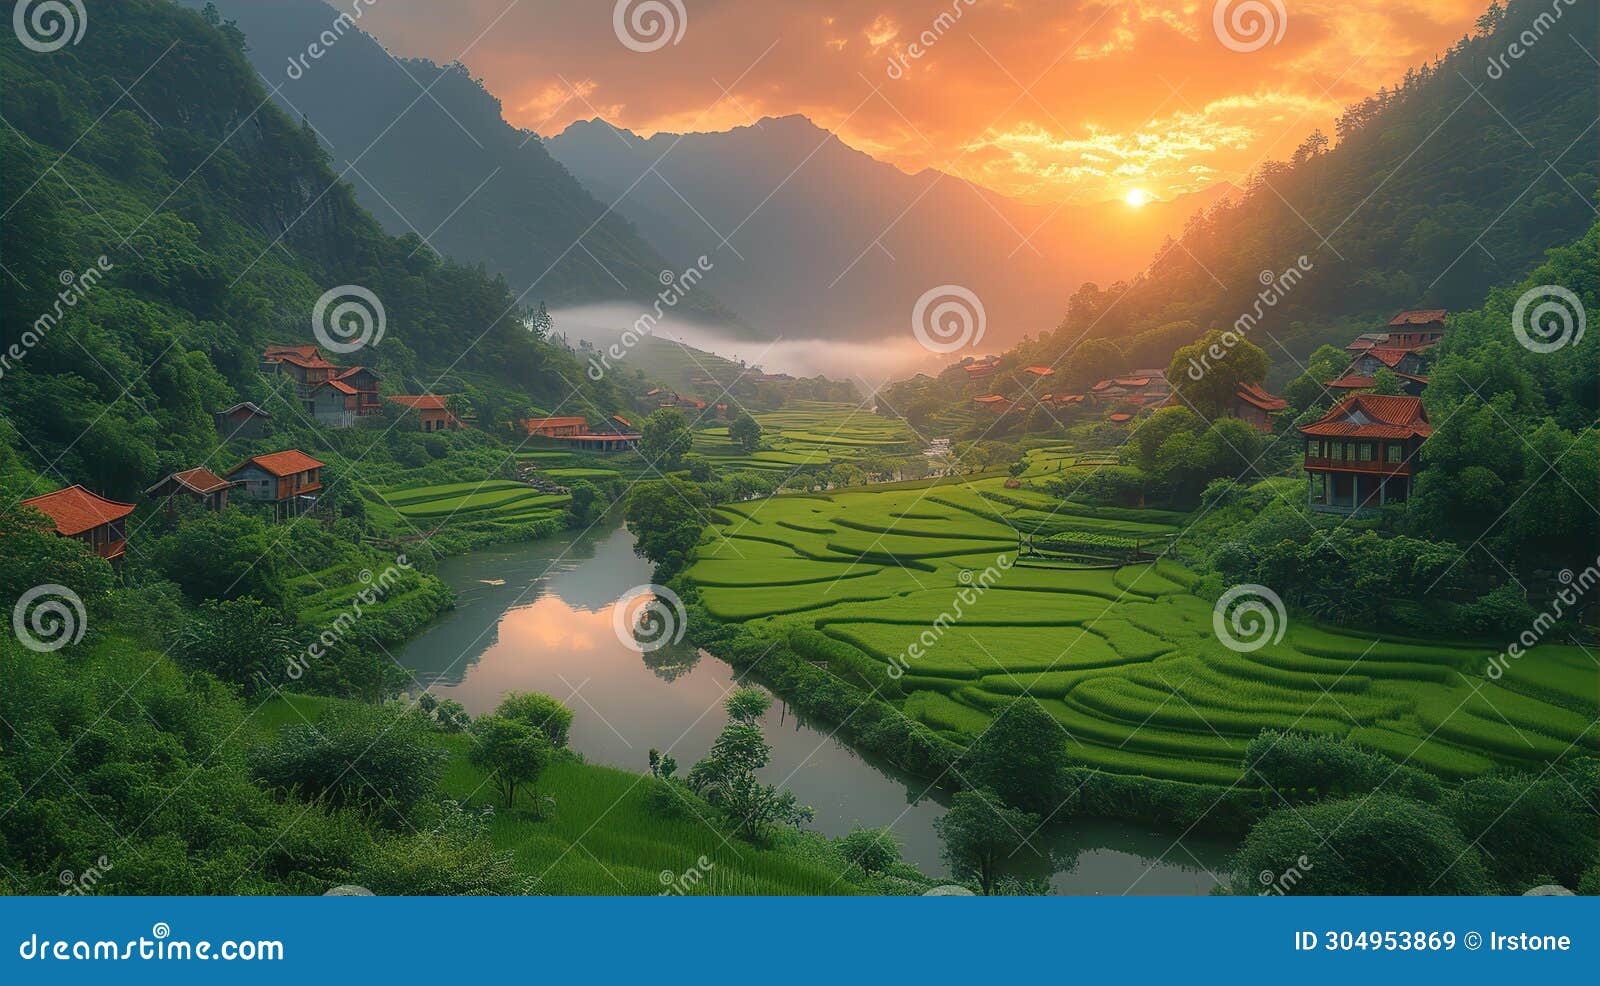 : beautiful landscape of china rural countryside with rive and traditional houses at sunset